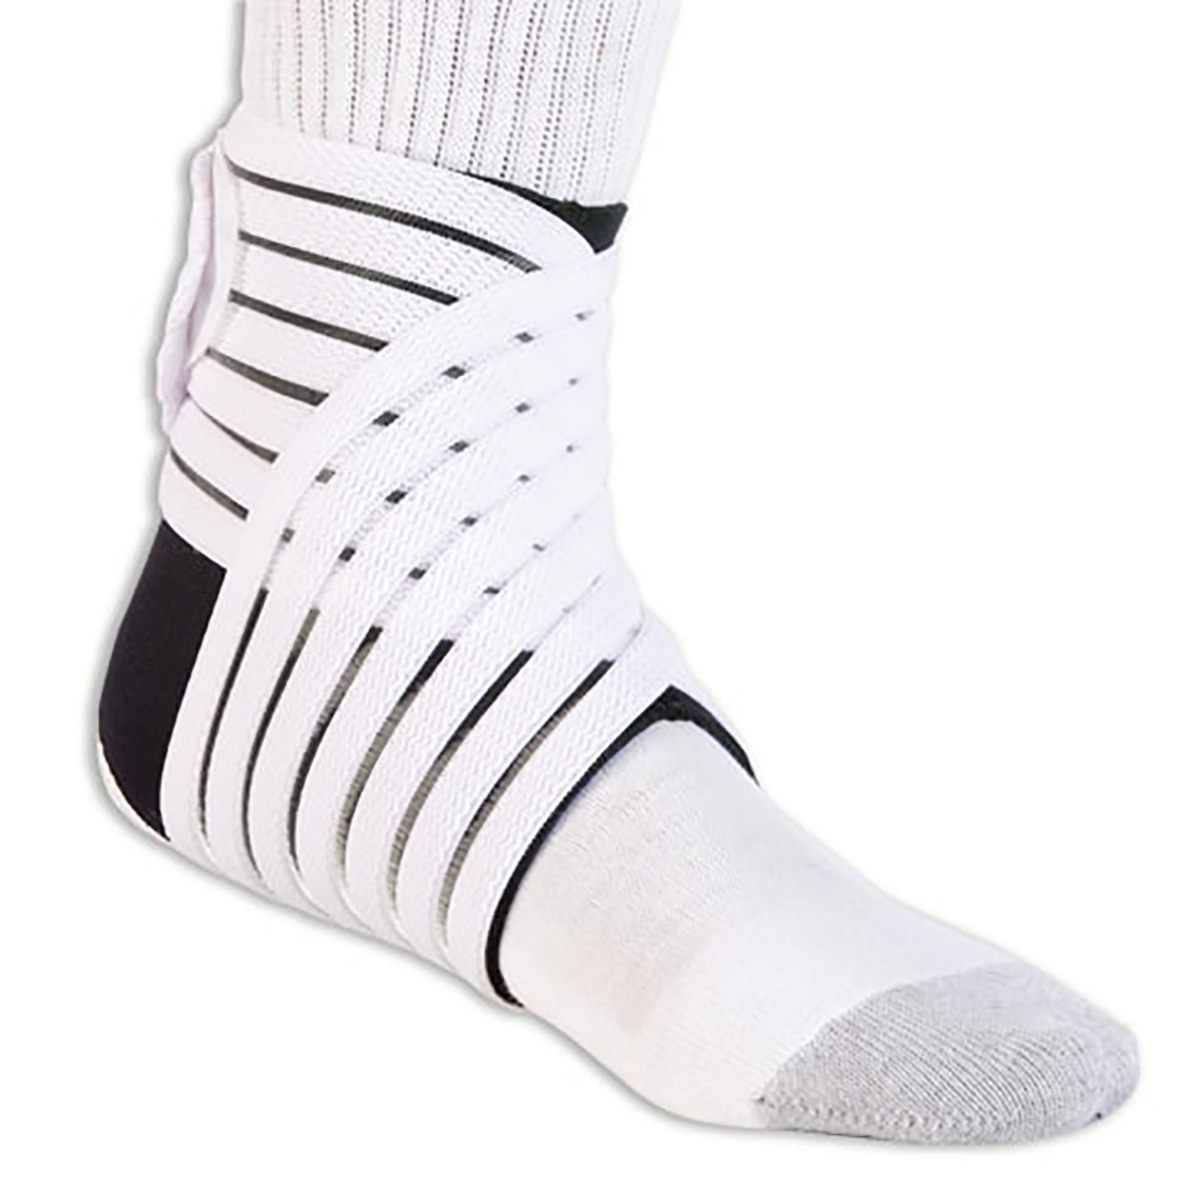 Pro-Tec Wrap Ankle Support, , large image number null